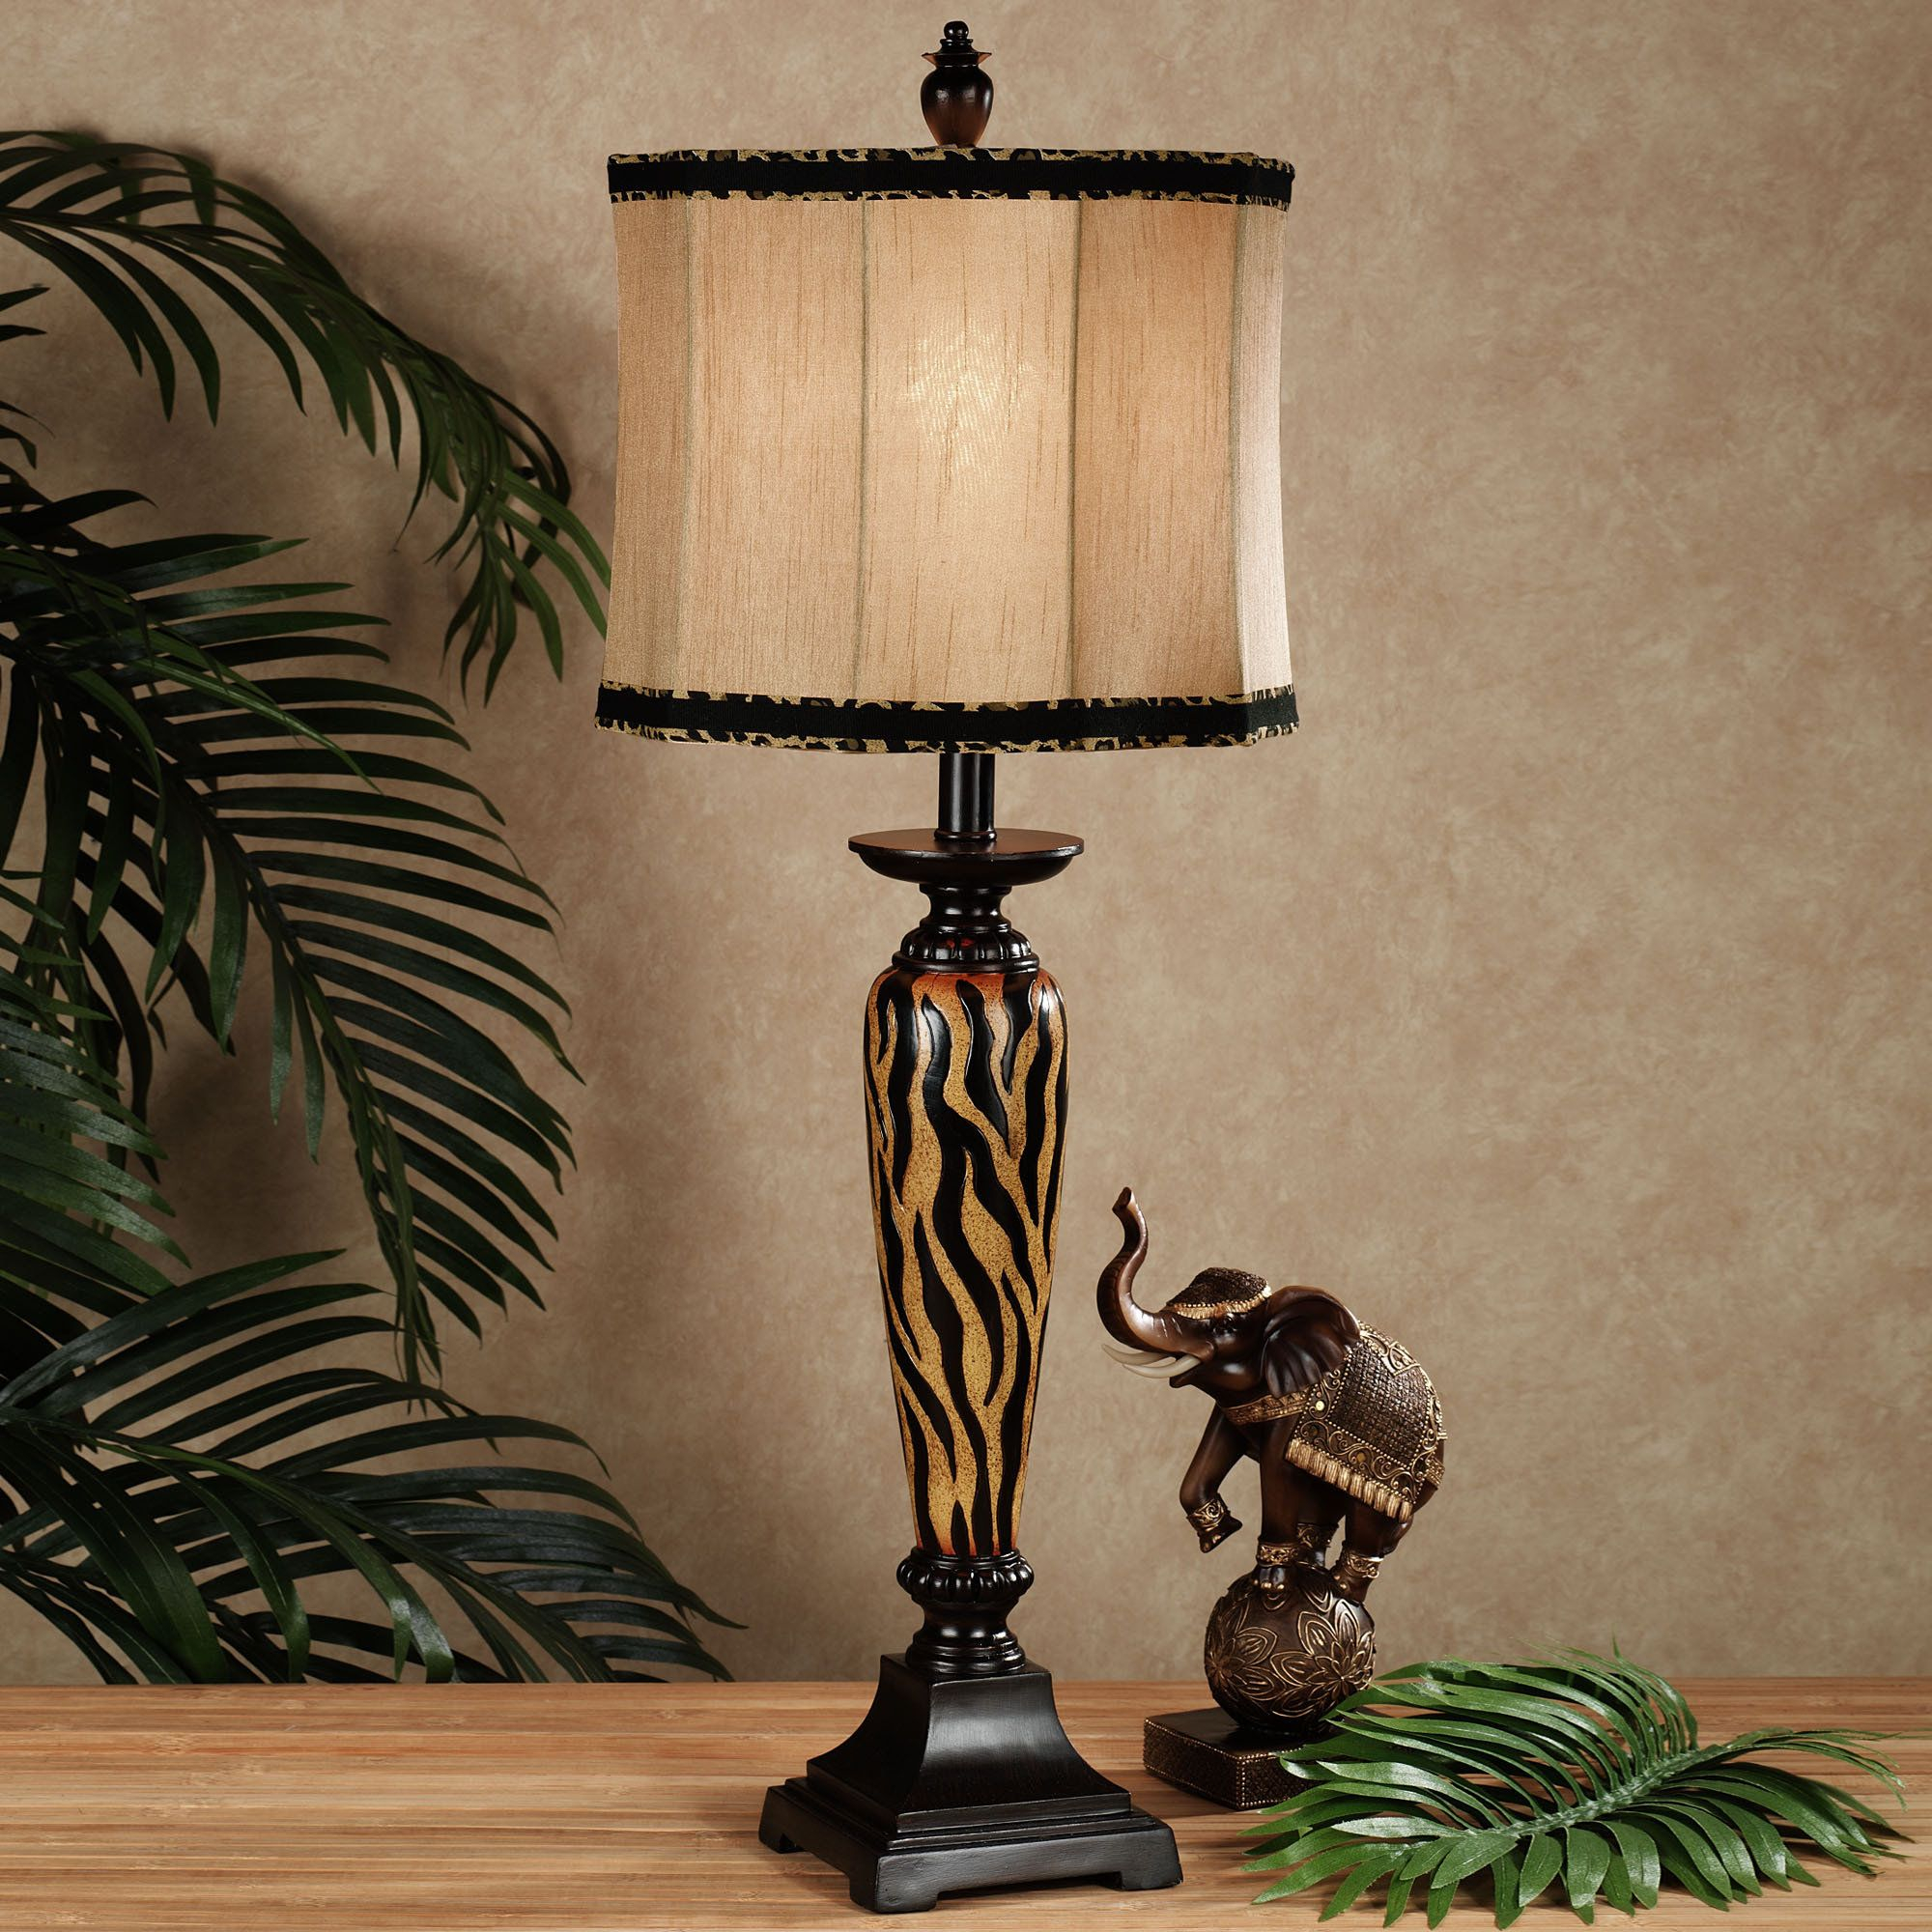 Something Wild Tiger Print Table Lamp Safari Bedroom intended for size 2000 X 2000